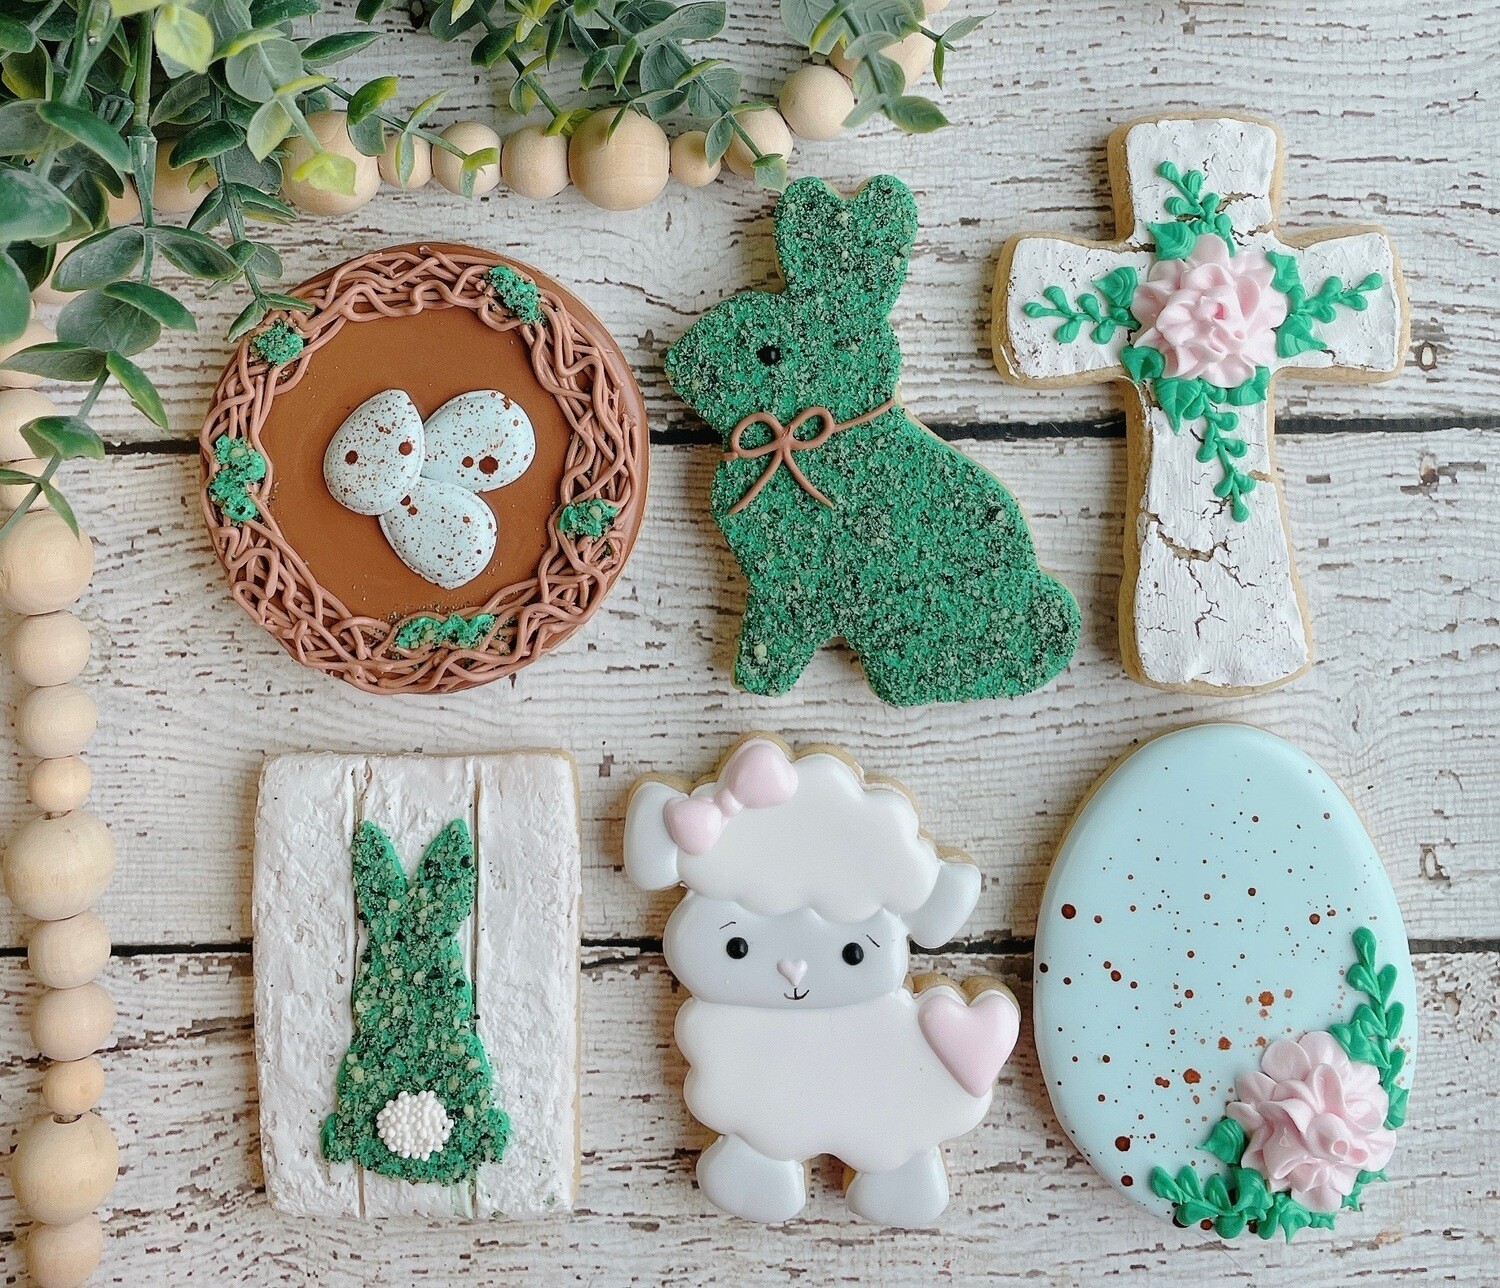 Cookie Decorating Class - Easter March 14, 2023      
(In store, 7-9pm)